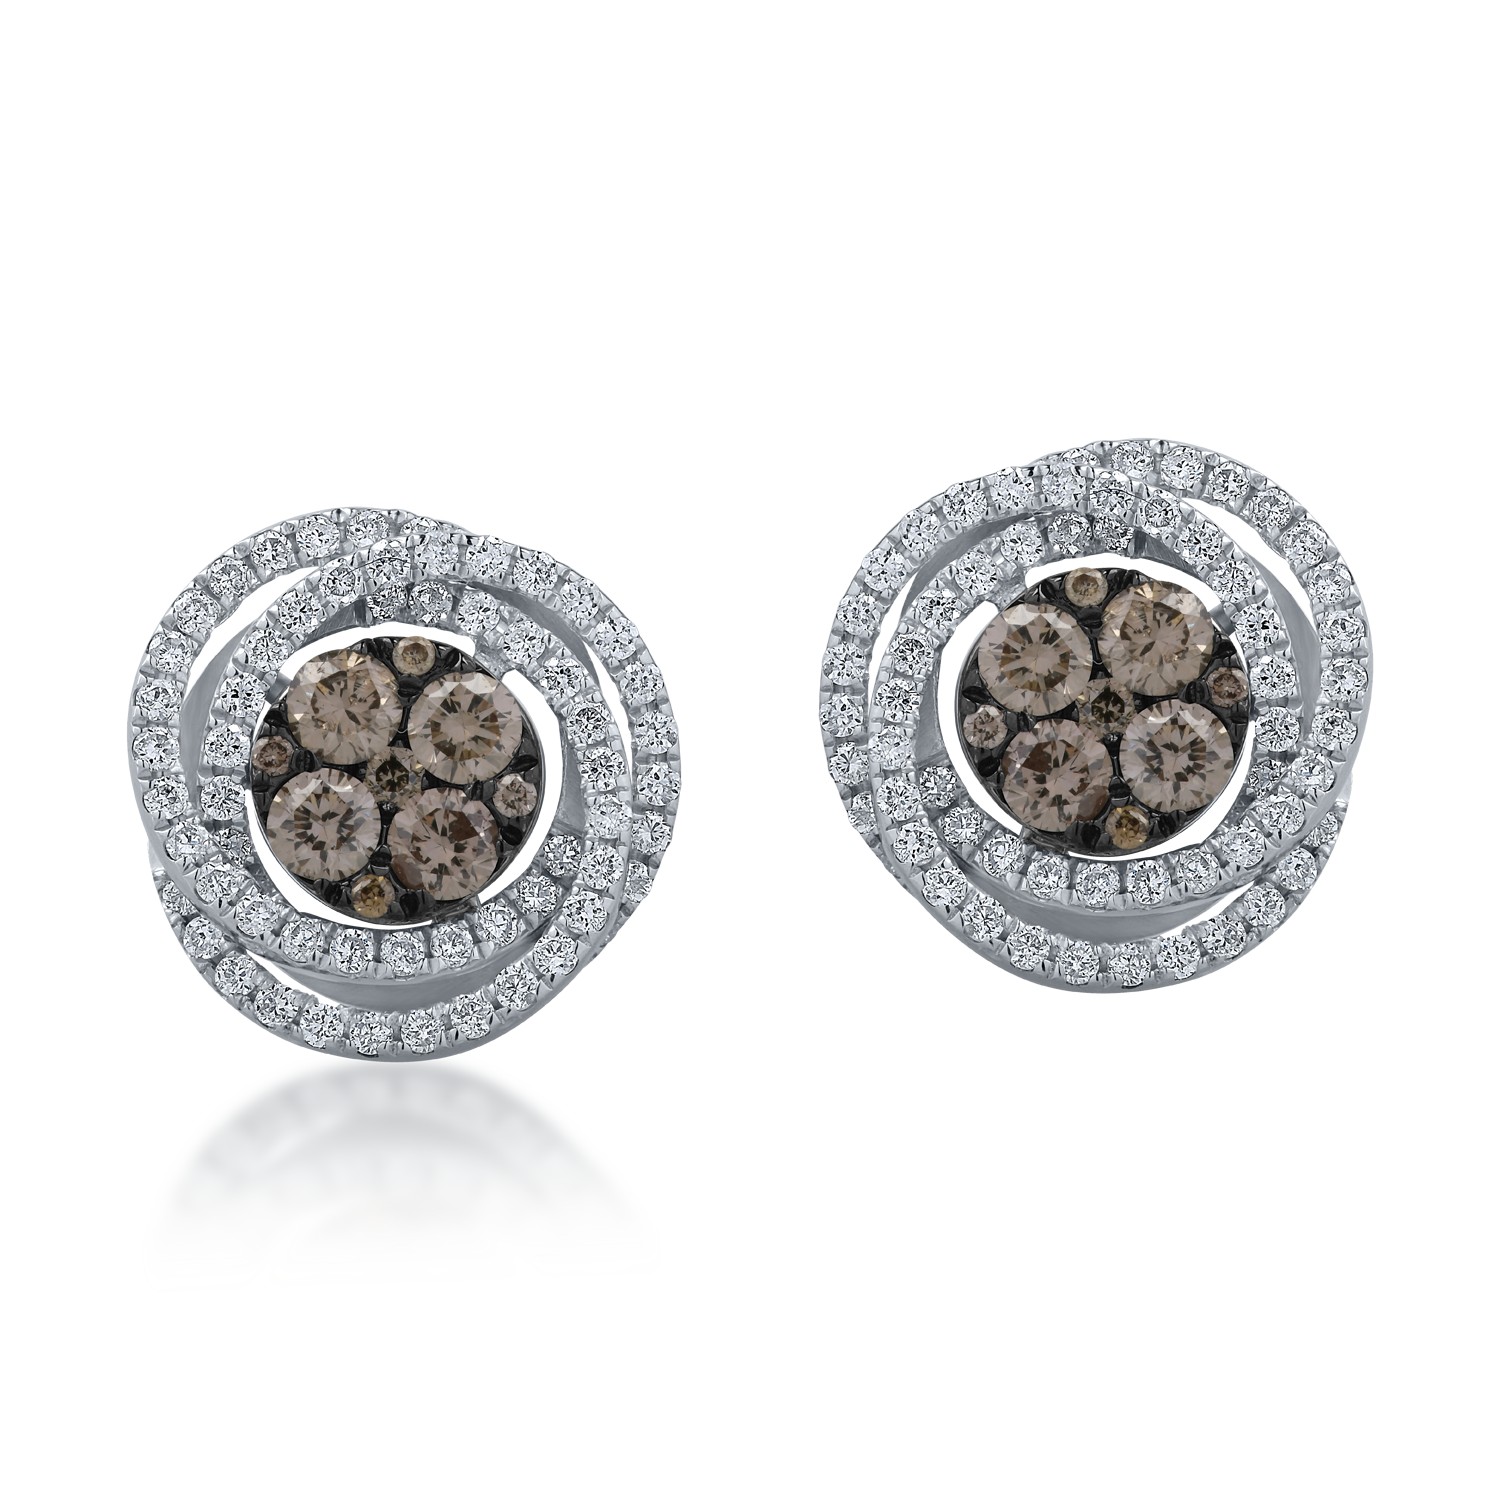 White gold round earrings with 0.7ct brown and clear diamonds